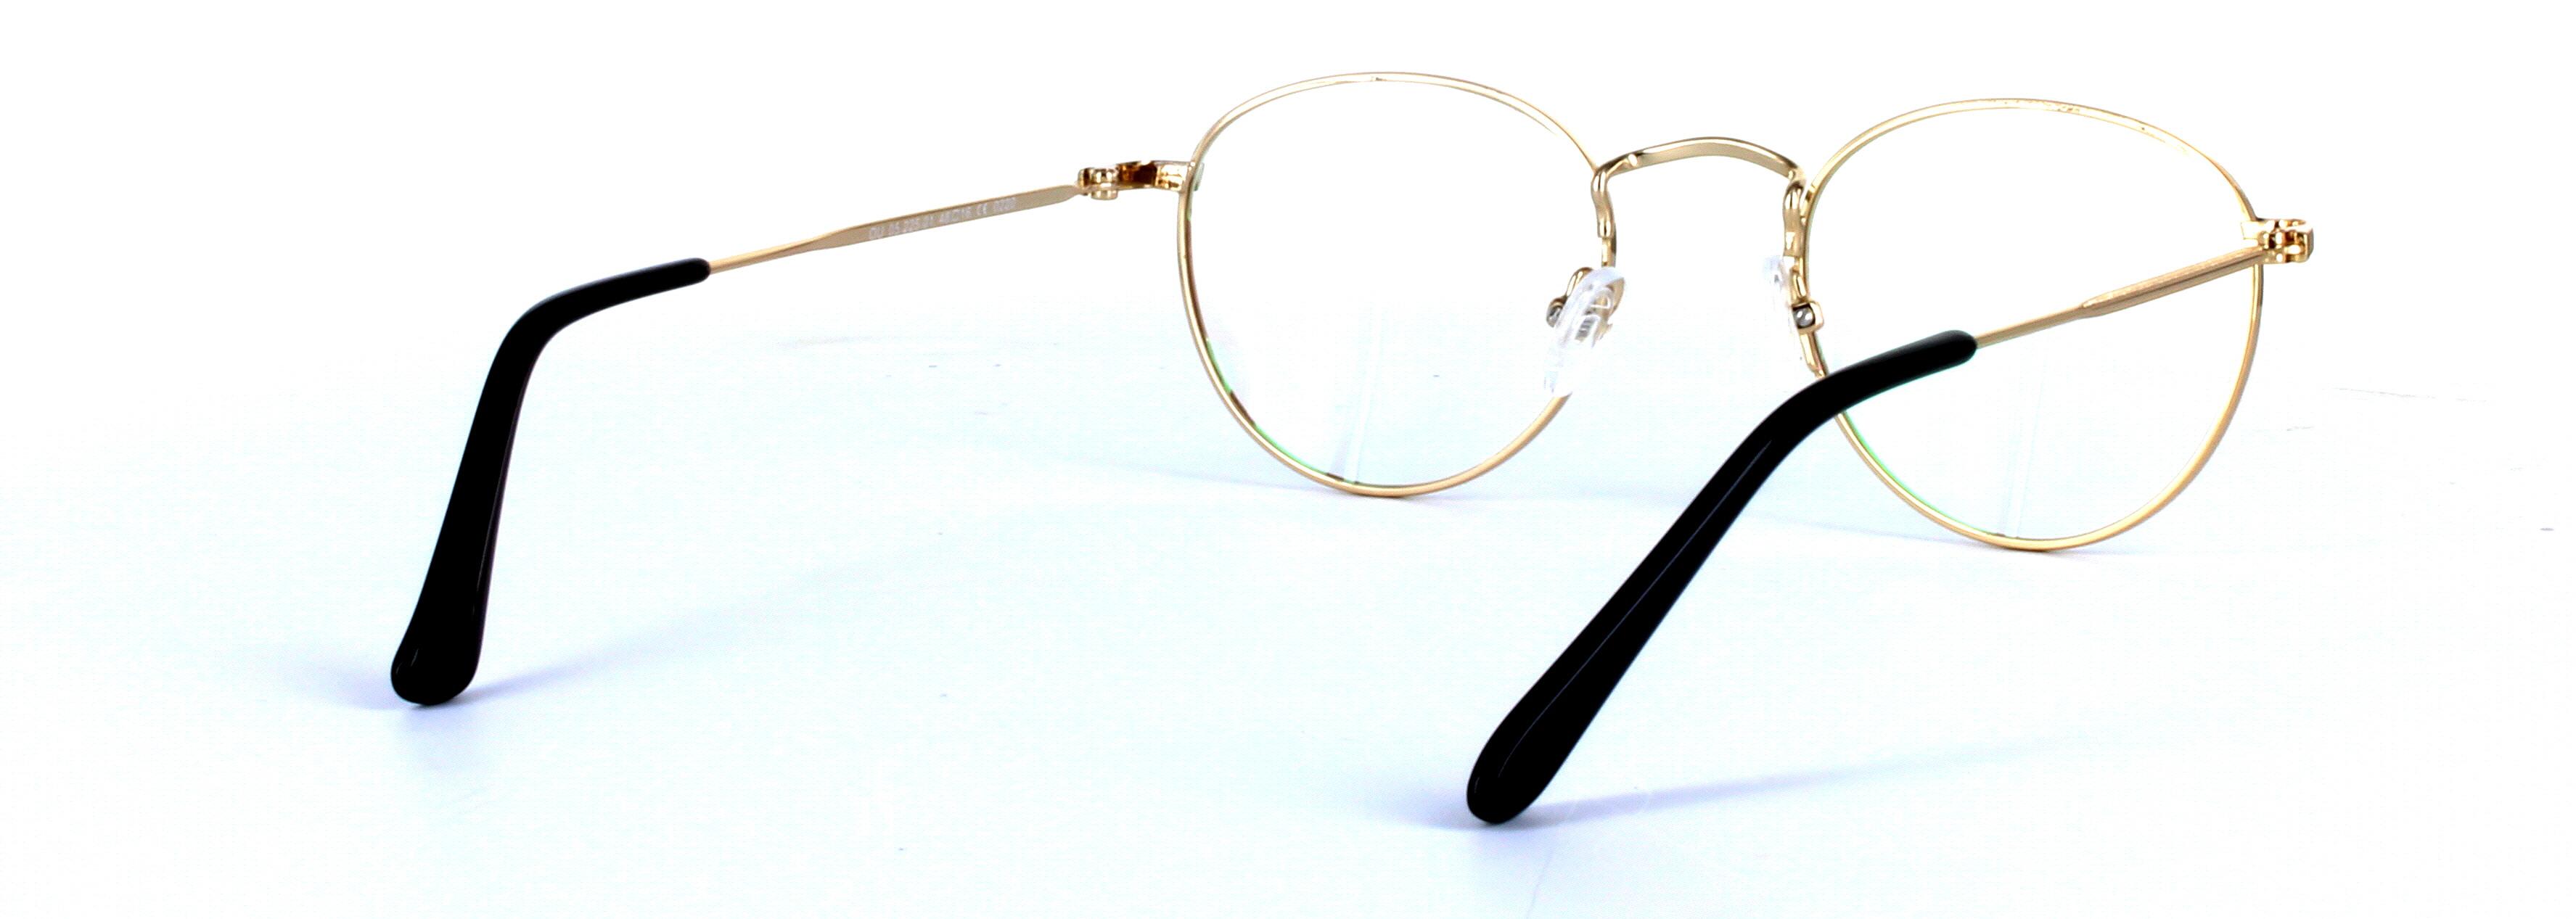 Birdy Gold Full Rim Round Metal Glasses - Image View 4